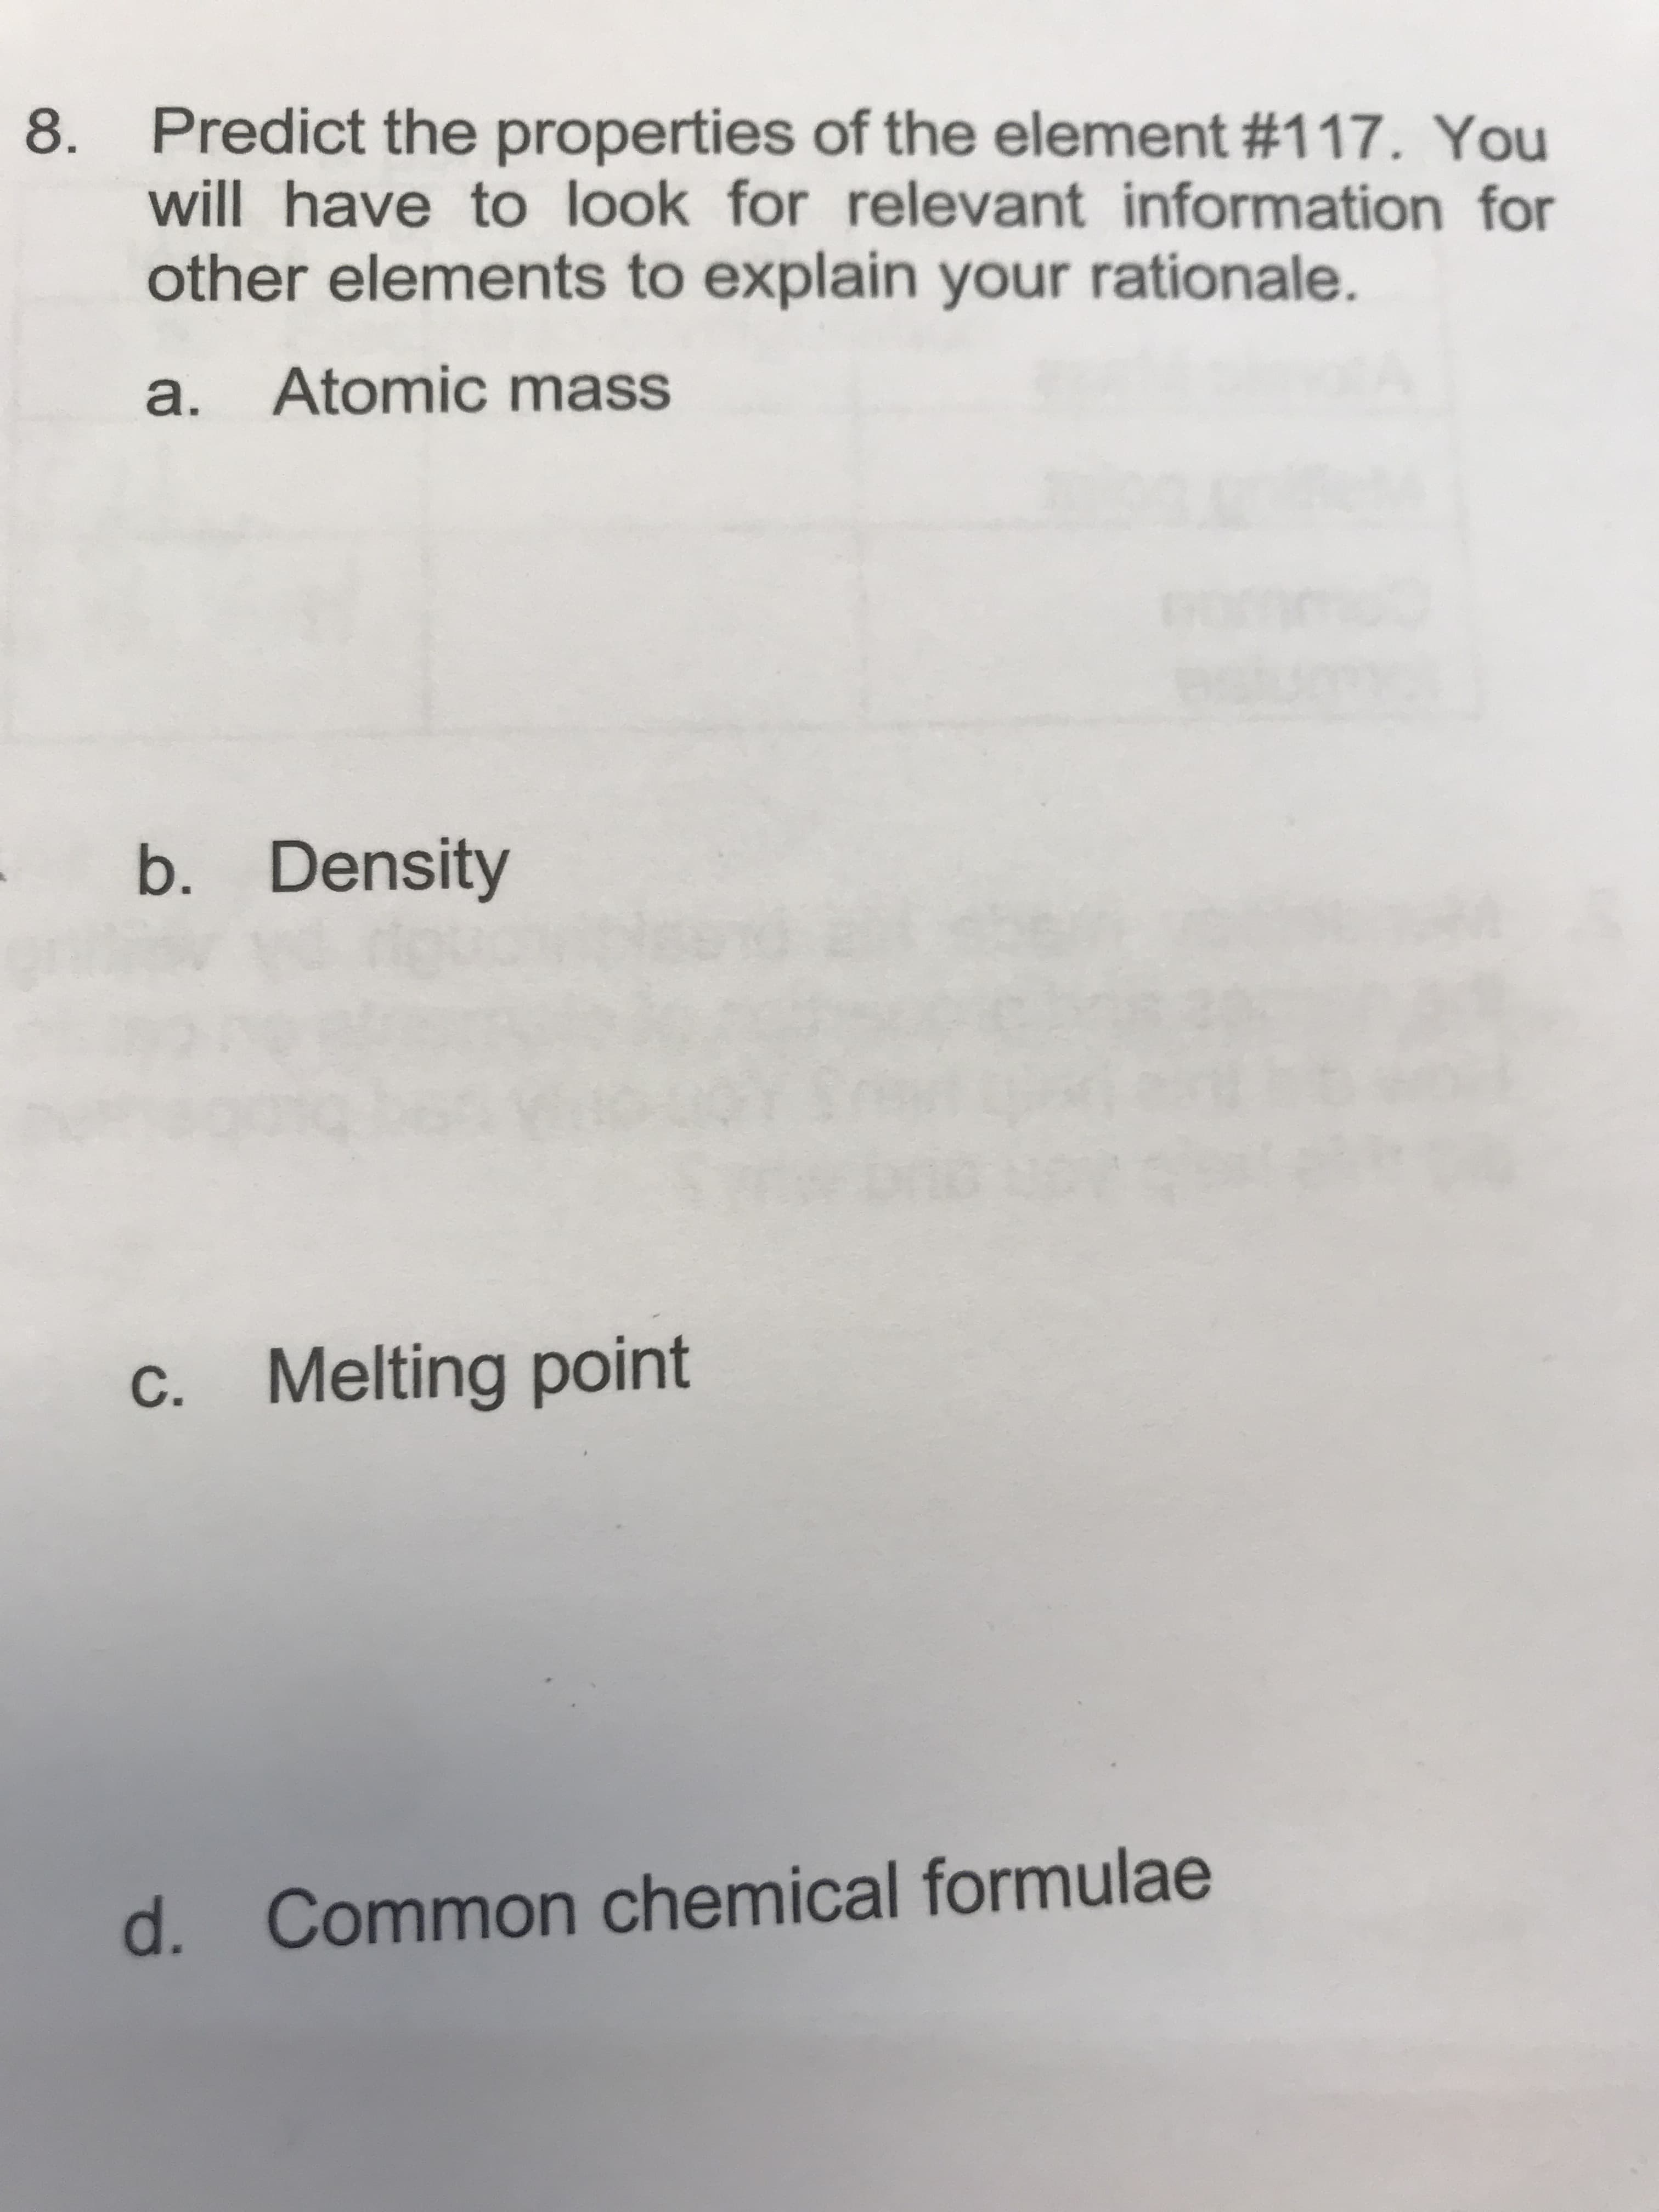 Predict the properties of the element #117 . You
8
will have to look for relevant information for
other elements to explain your rationale.
Atomic mass
а.
b. Density
C. Melting point
Common chemical formulae
d.
